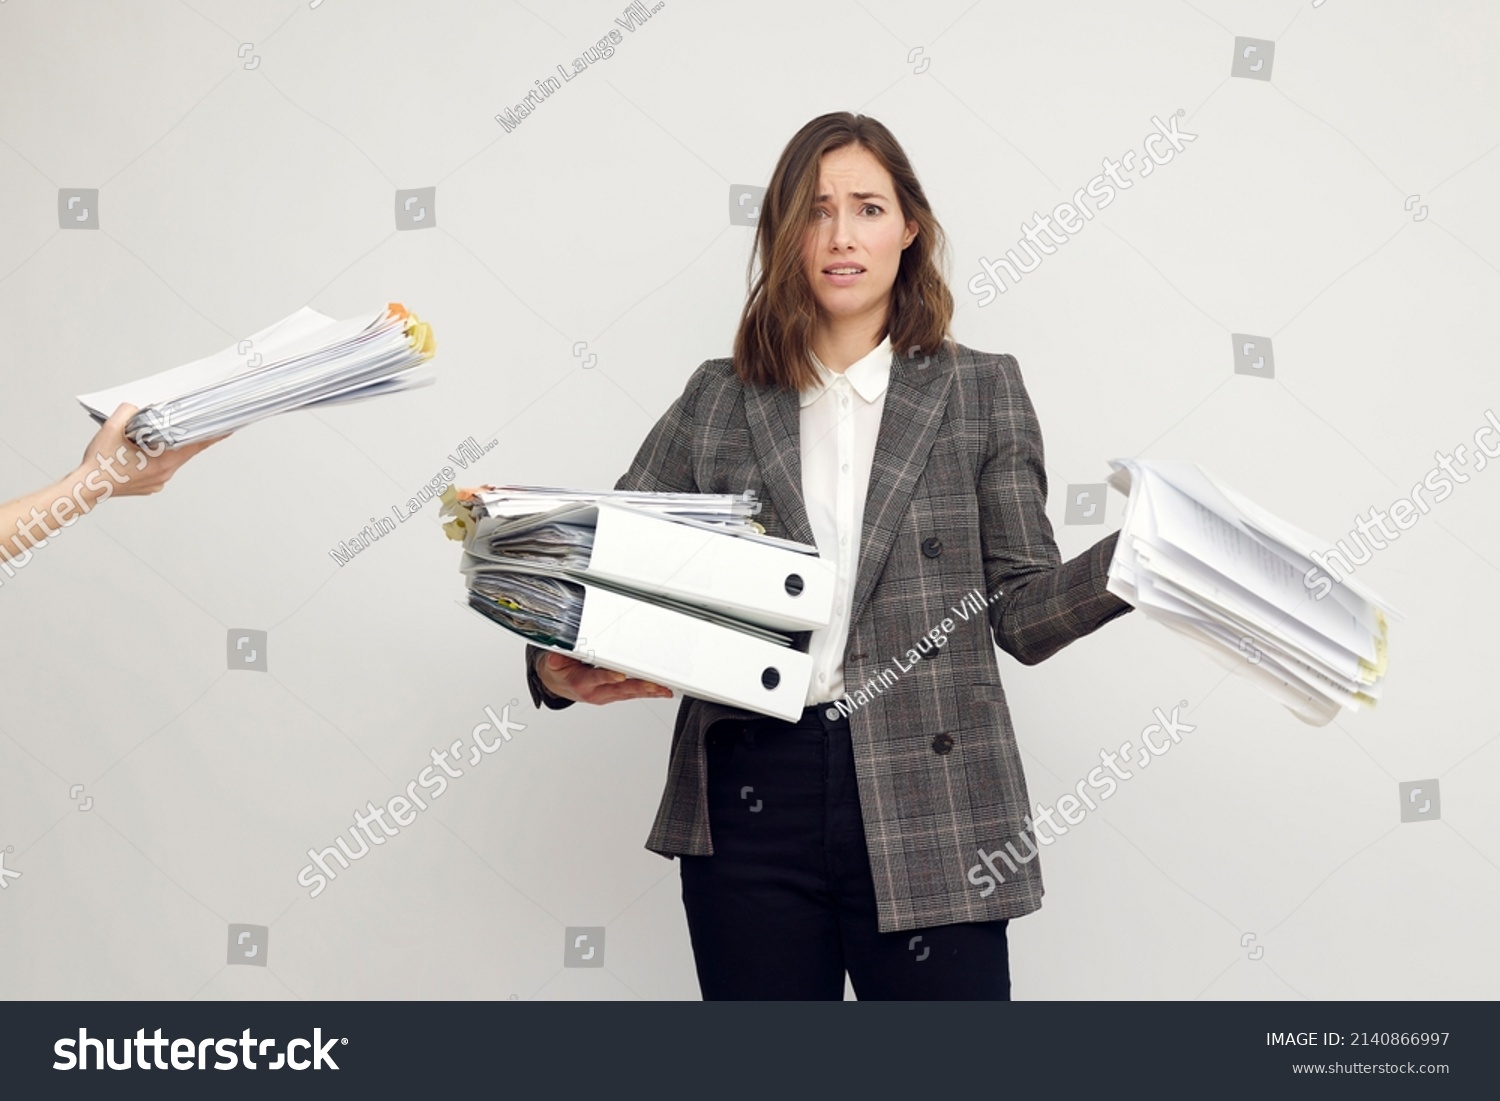 Stressed female worker and business woman holding a pile of paperwork while getting more work to do. Looking frustrated in camera, isolated on white background. Concept: Too much work #2140866997